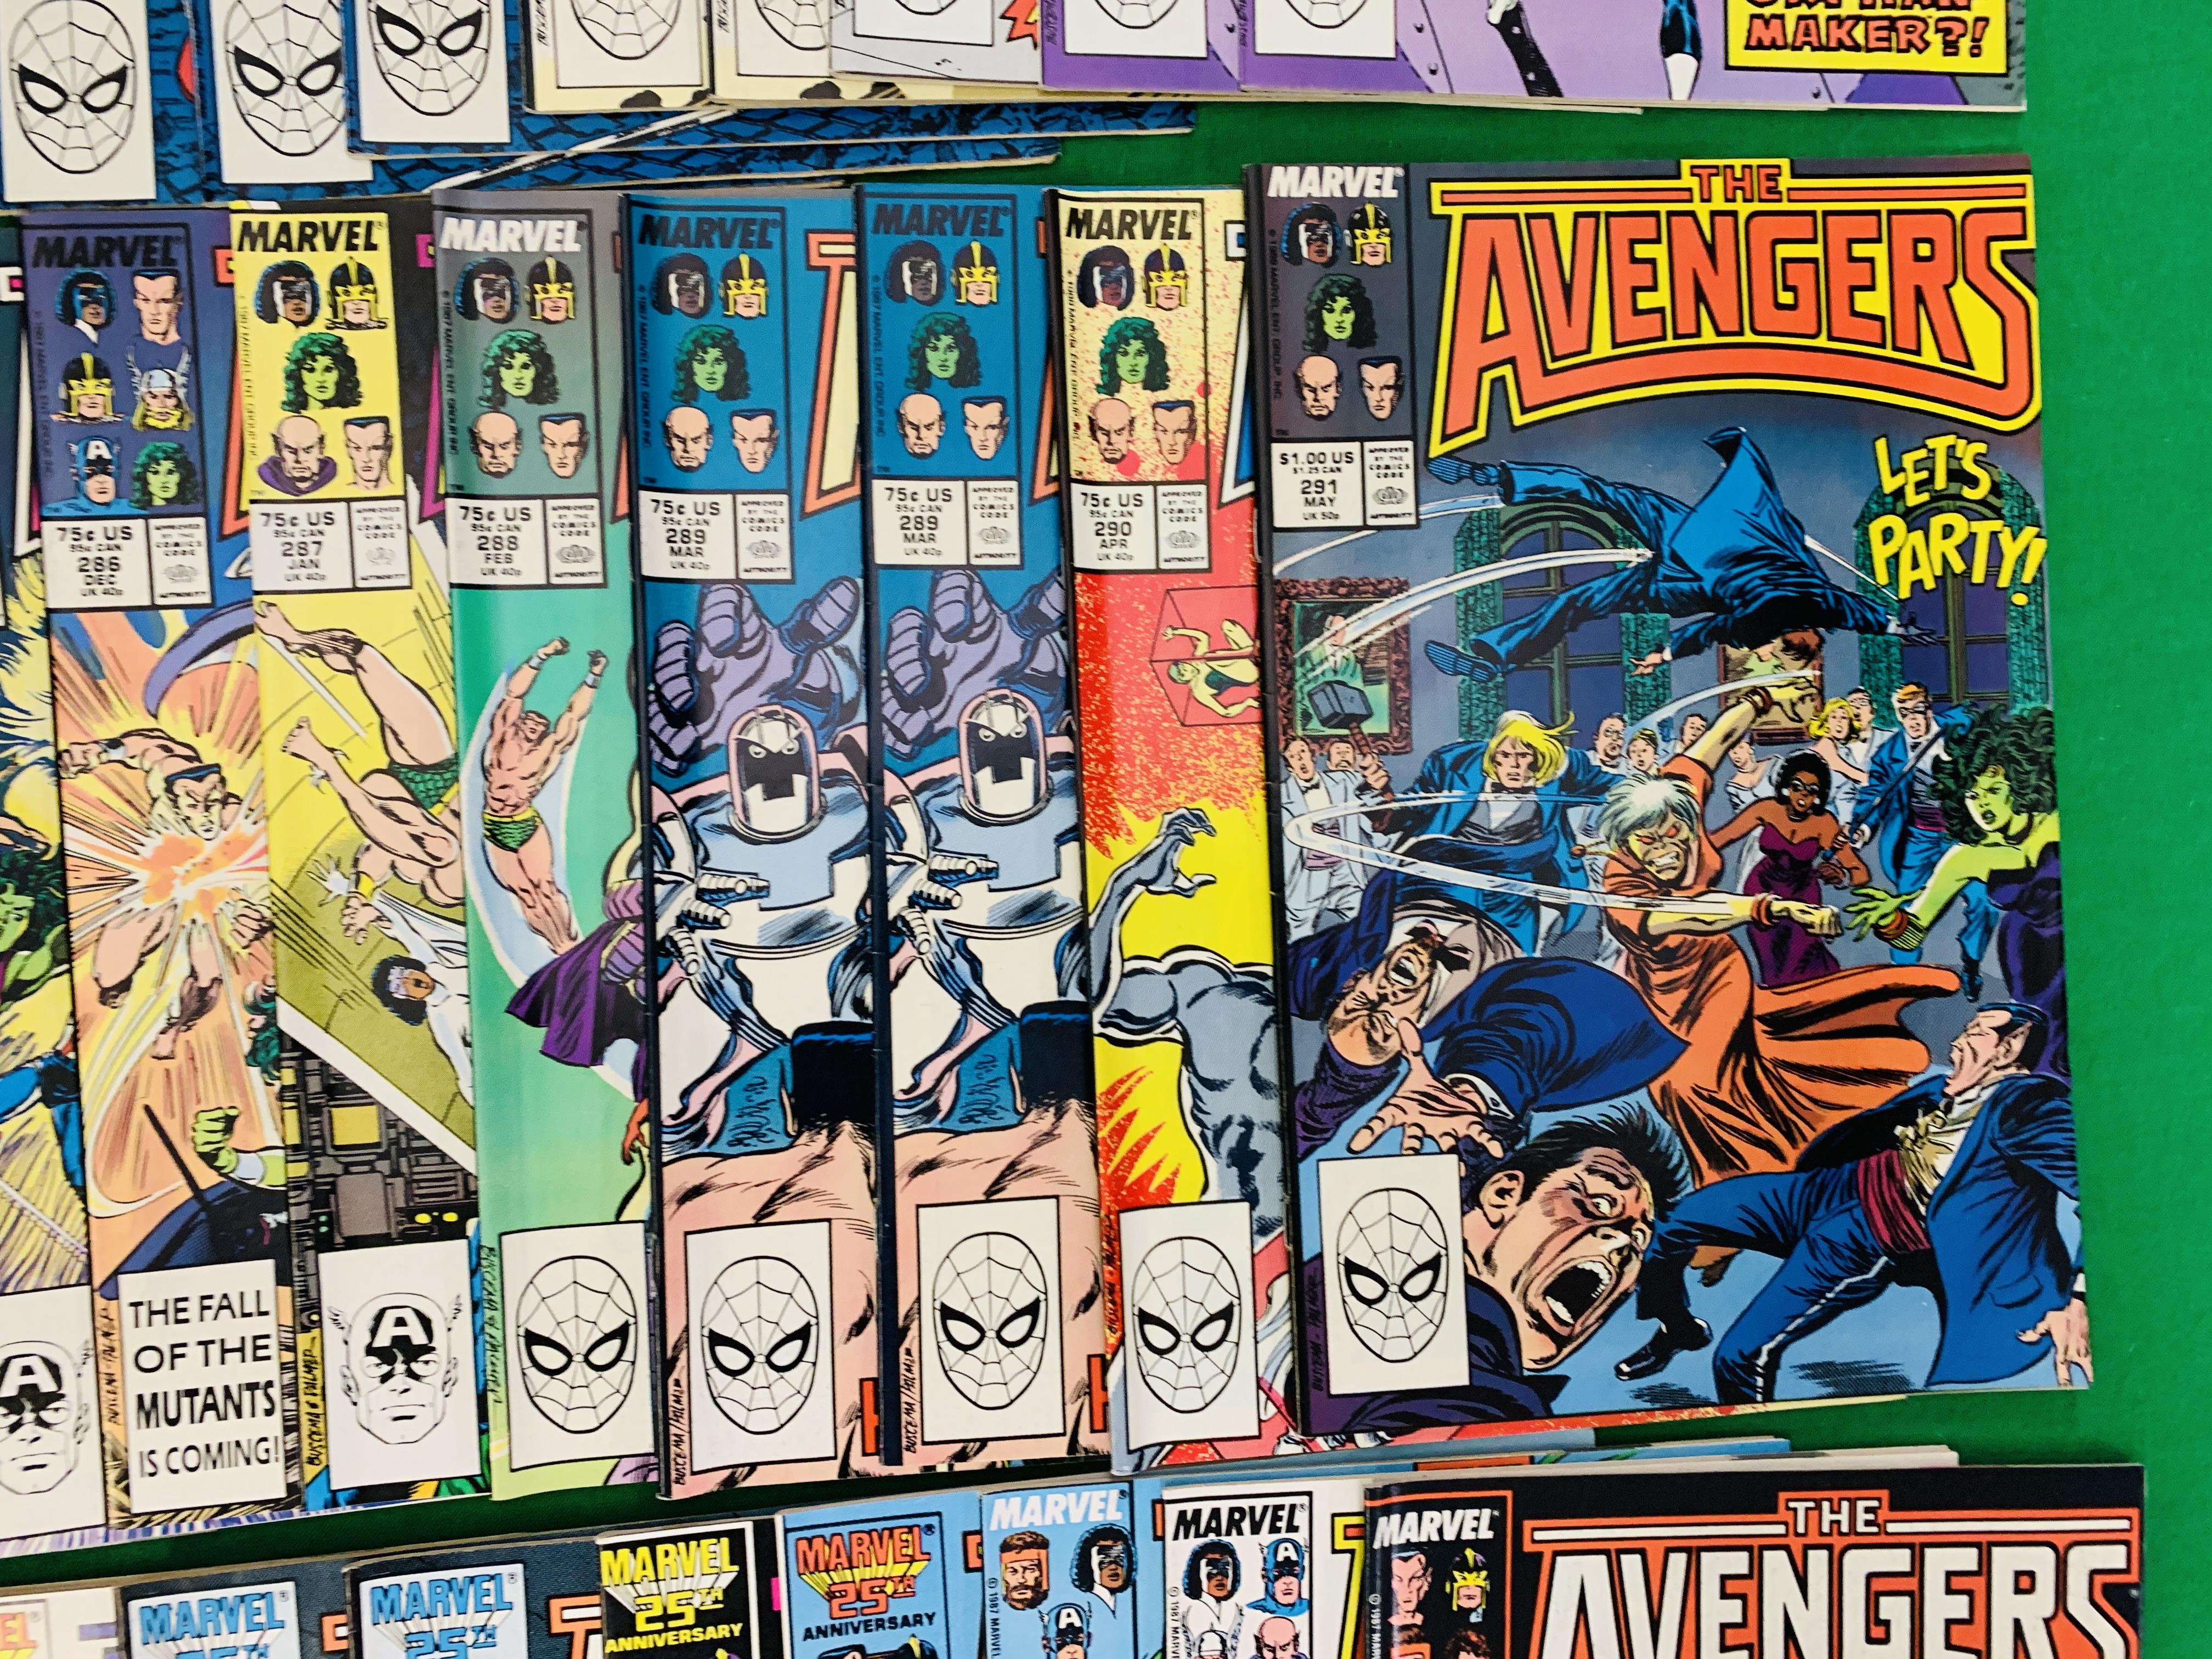 MARVEL COMICS THE AVENGERS NO. 101 - 299, MISSING ISSUES 103 AND 110. - Image 121 of 130